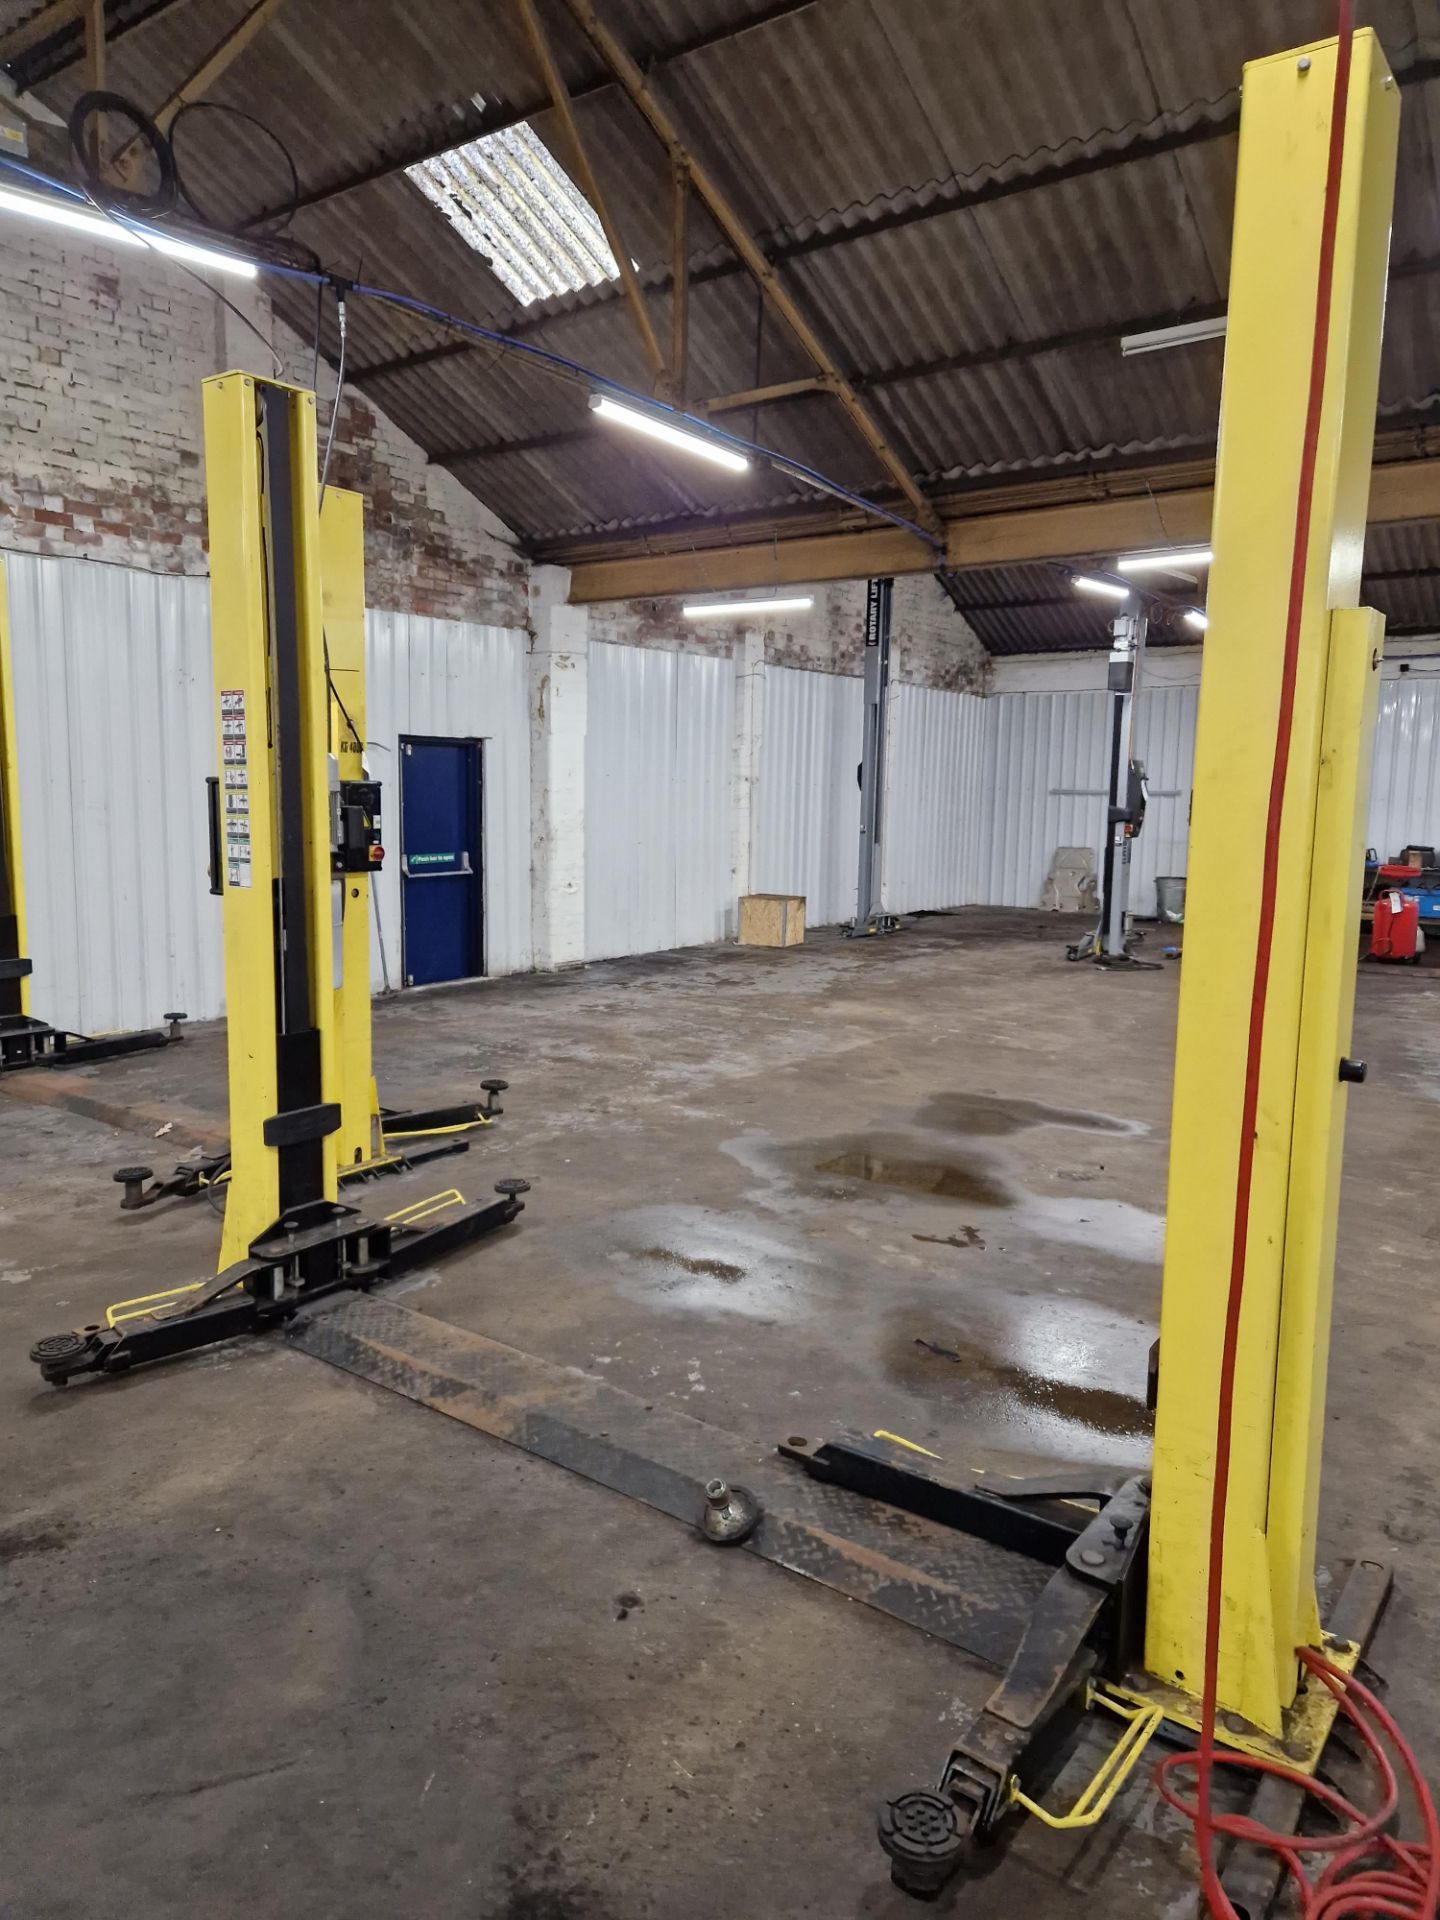 Dunlop Garage Equipment DL240/1 Twin Post Vehicle Lift, 4000KG Capacity, Year of Manufacture 2017, - Image 2 of 5